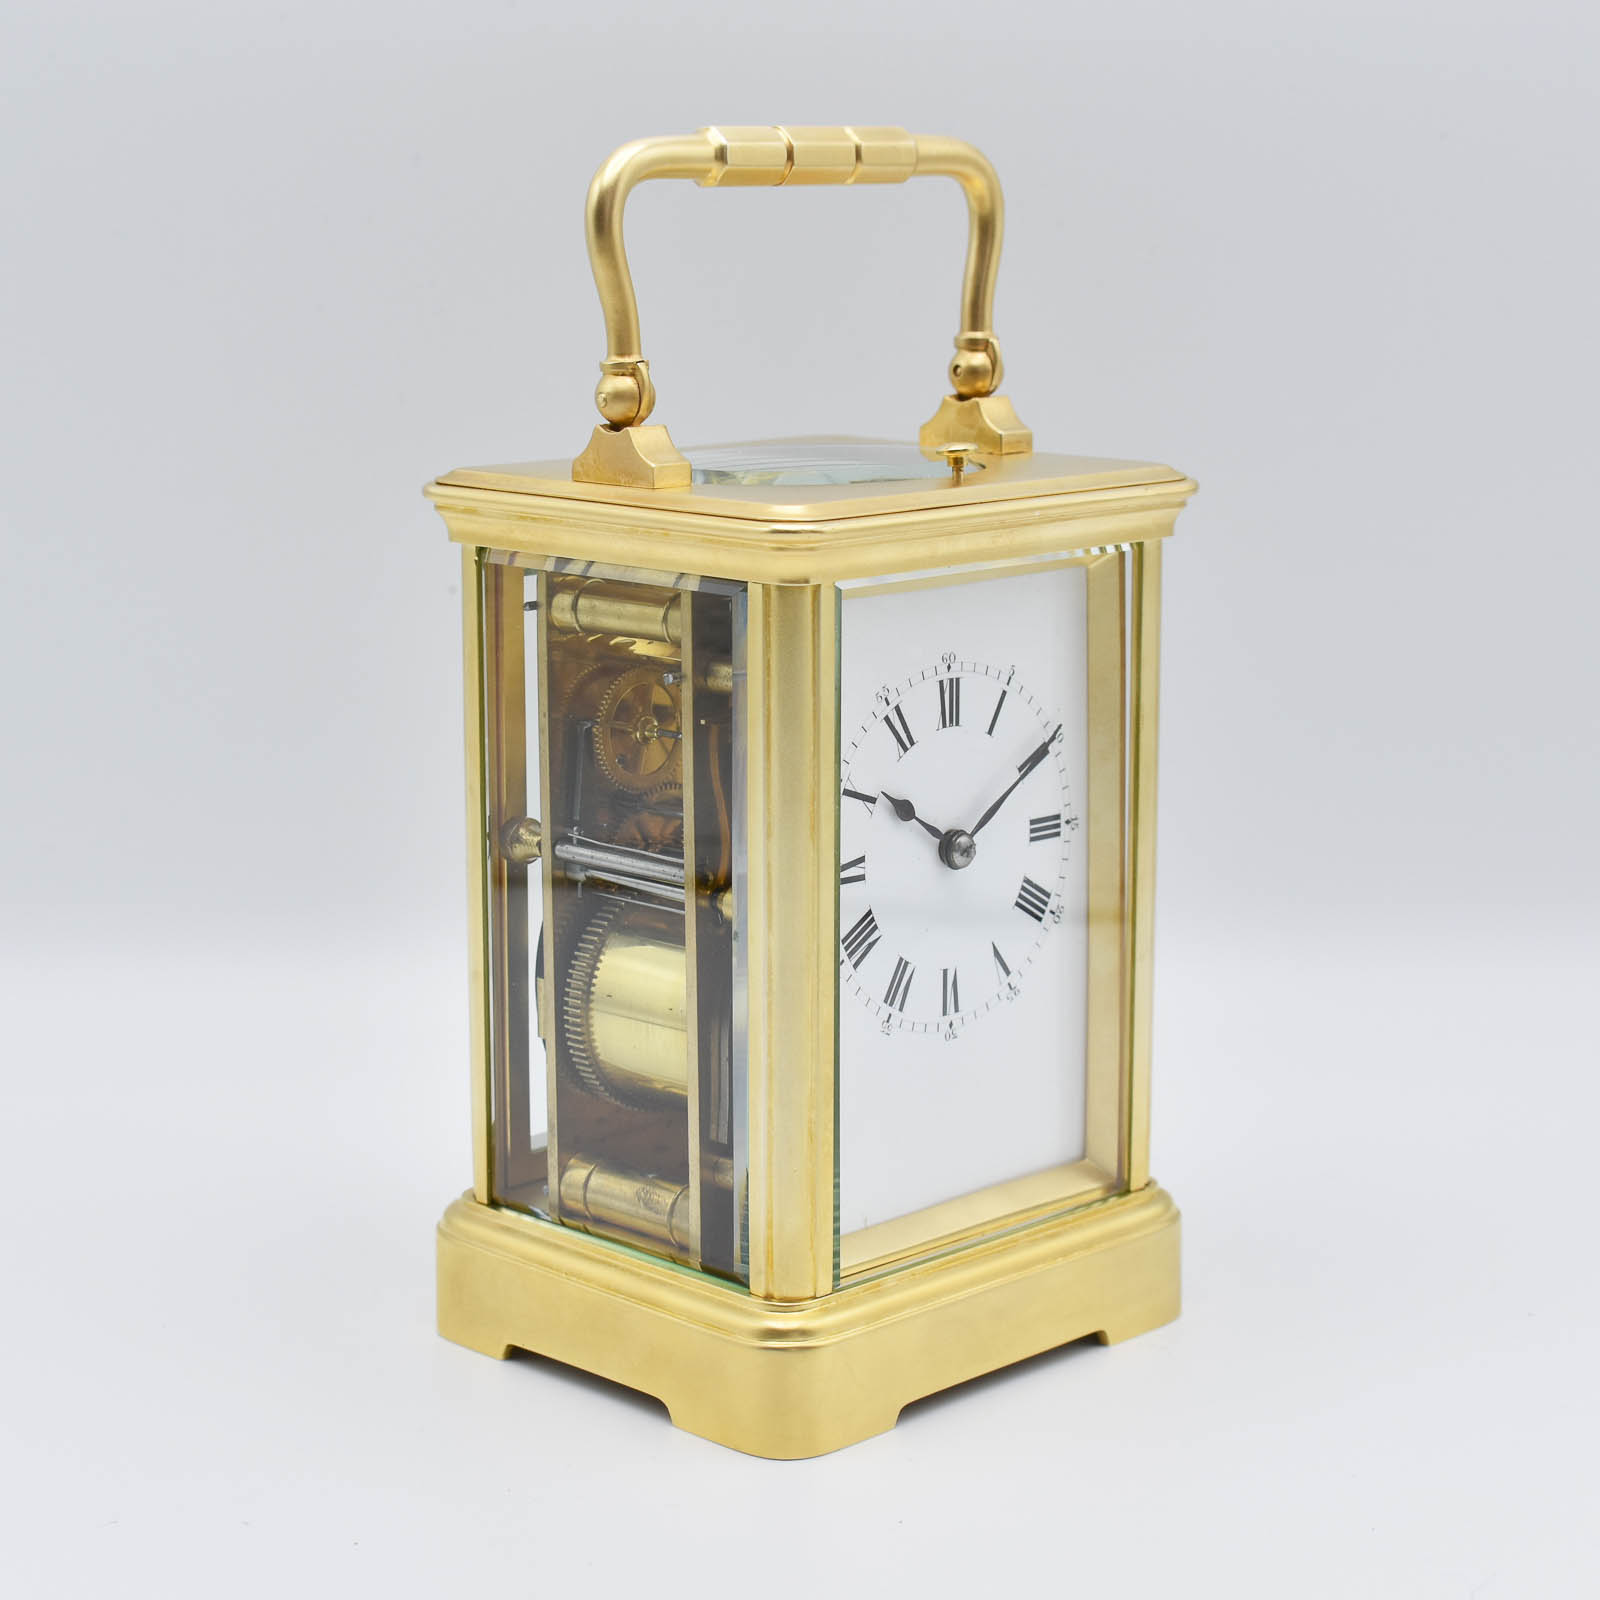 Carriage Clock – It's About Time